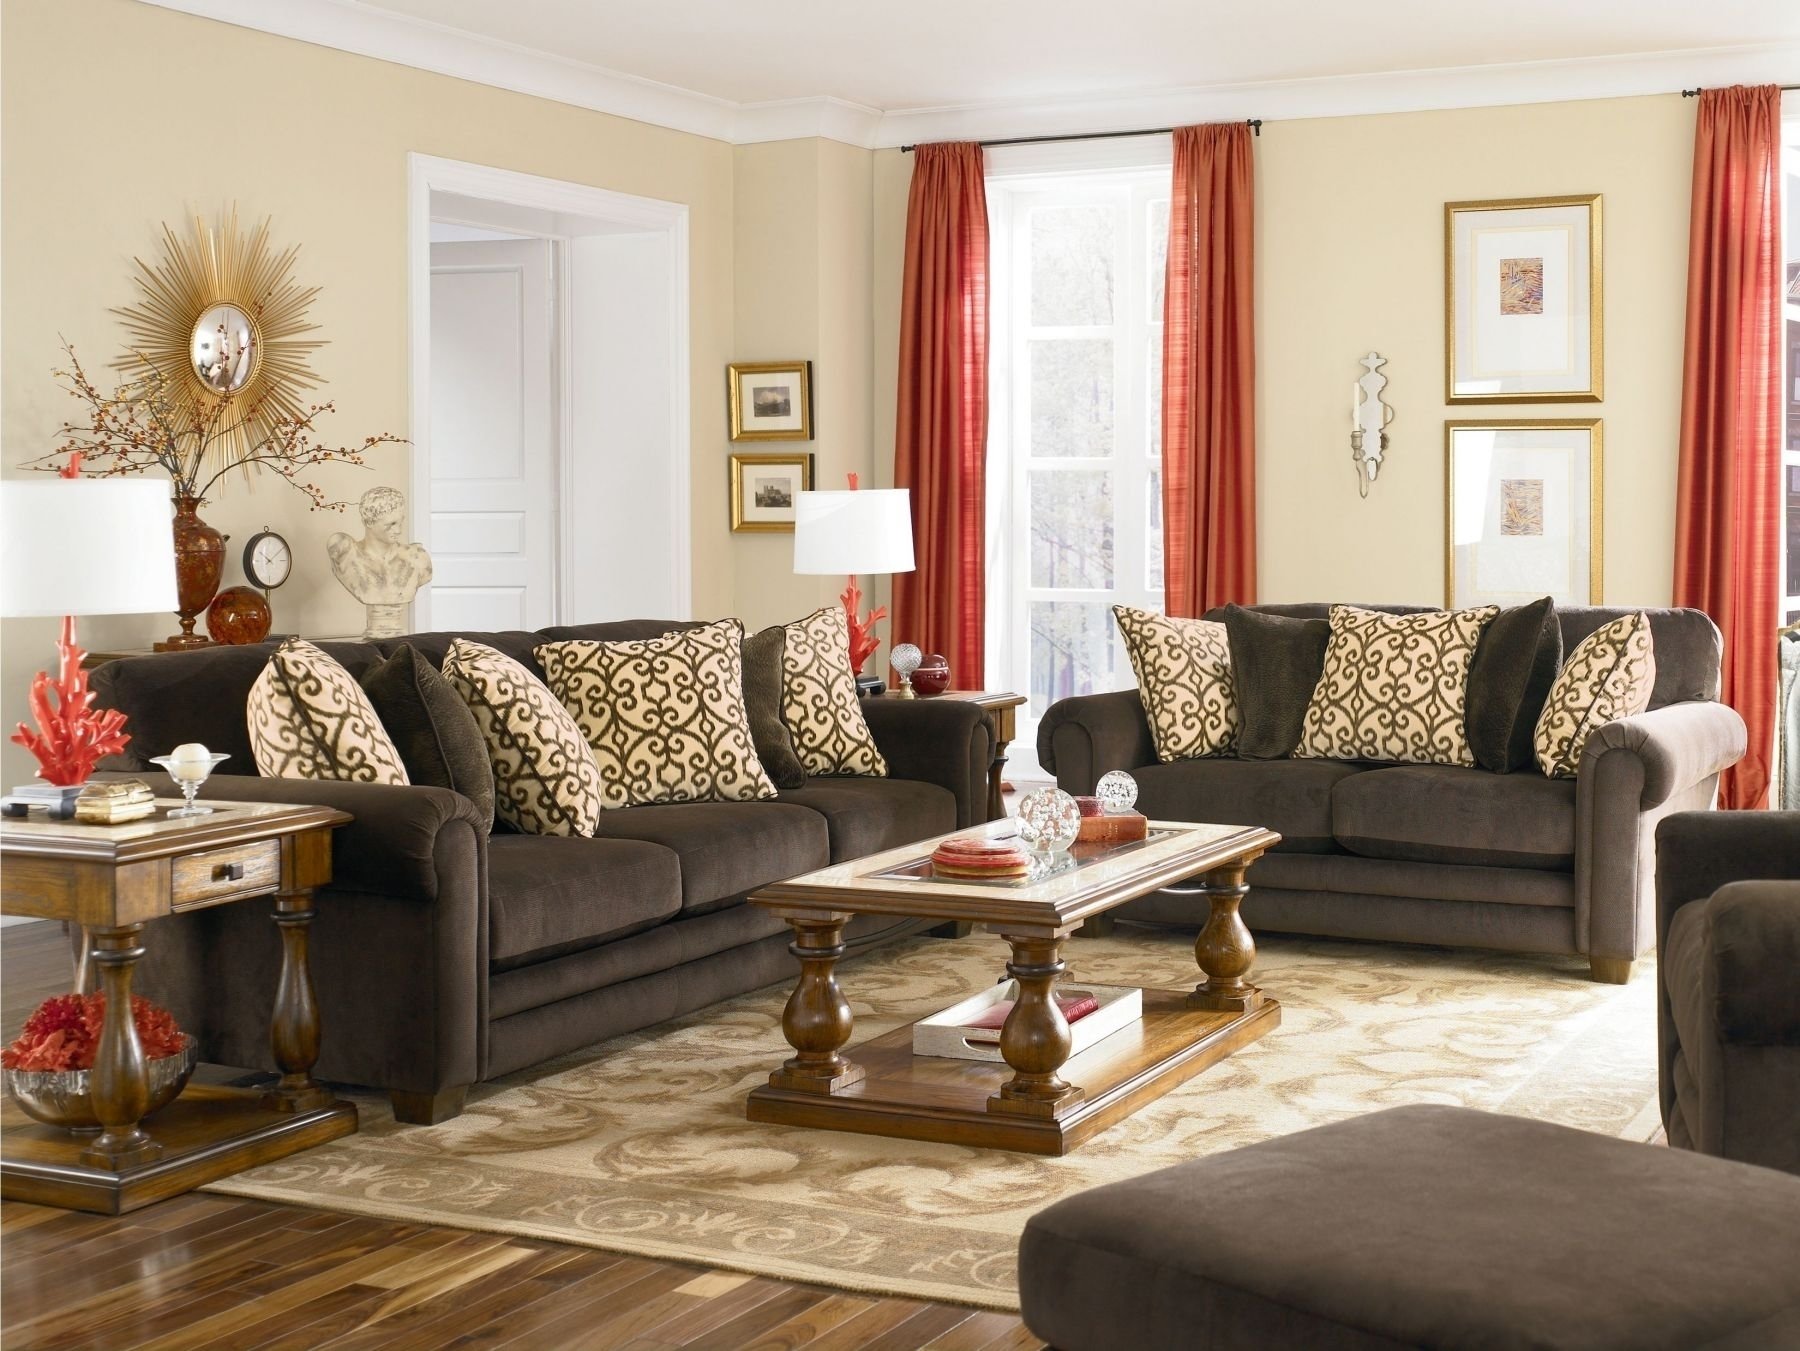 10 Awesome Brown Couch Living Room Ideas brown couches living room design ideas doherty living room x 2022